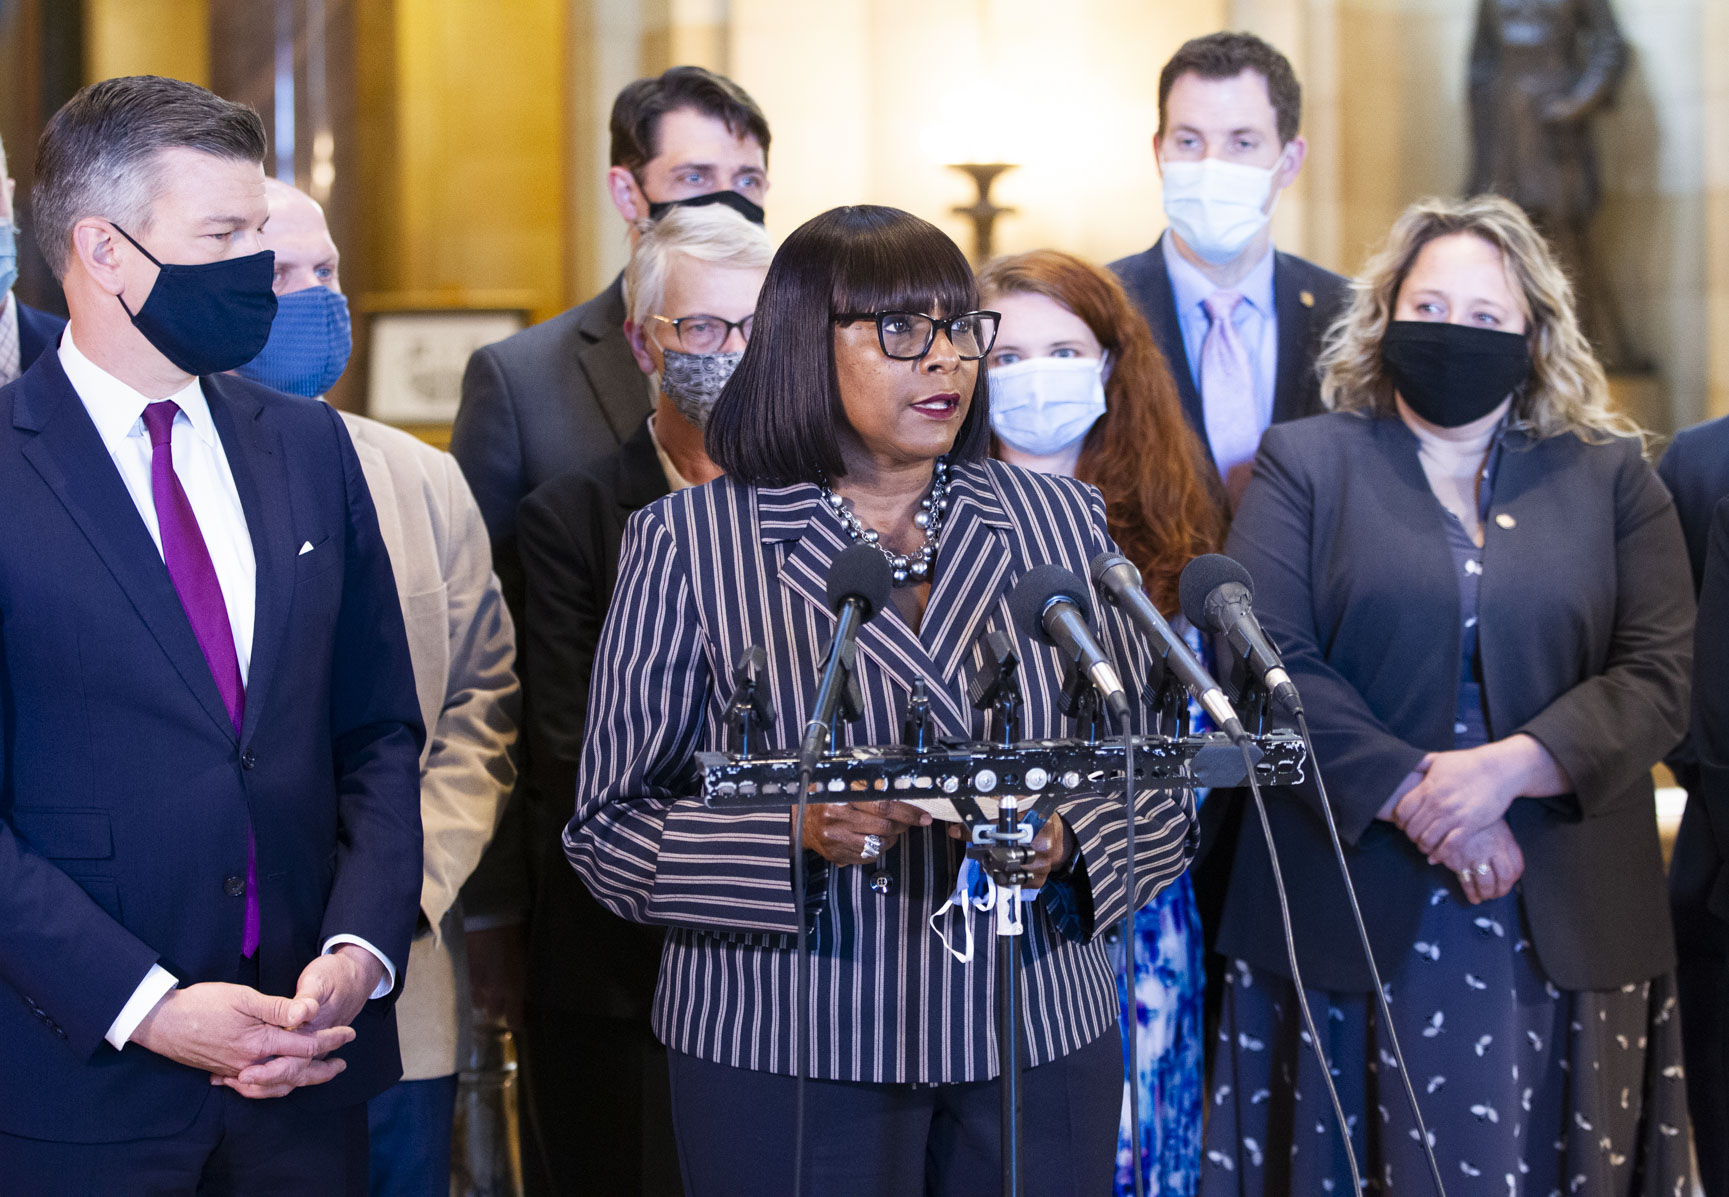 Rep. Rena Moran, pictured in May 2021, announced Jan. 24 she will not seek re-election to the House in 2022. Instead, the St. Paul DFLer said she will run for a seat on the Ramsey County Board. (House Photography file photo)